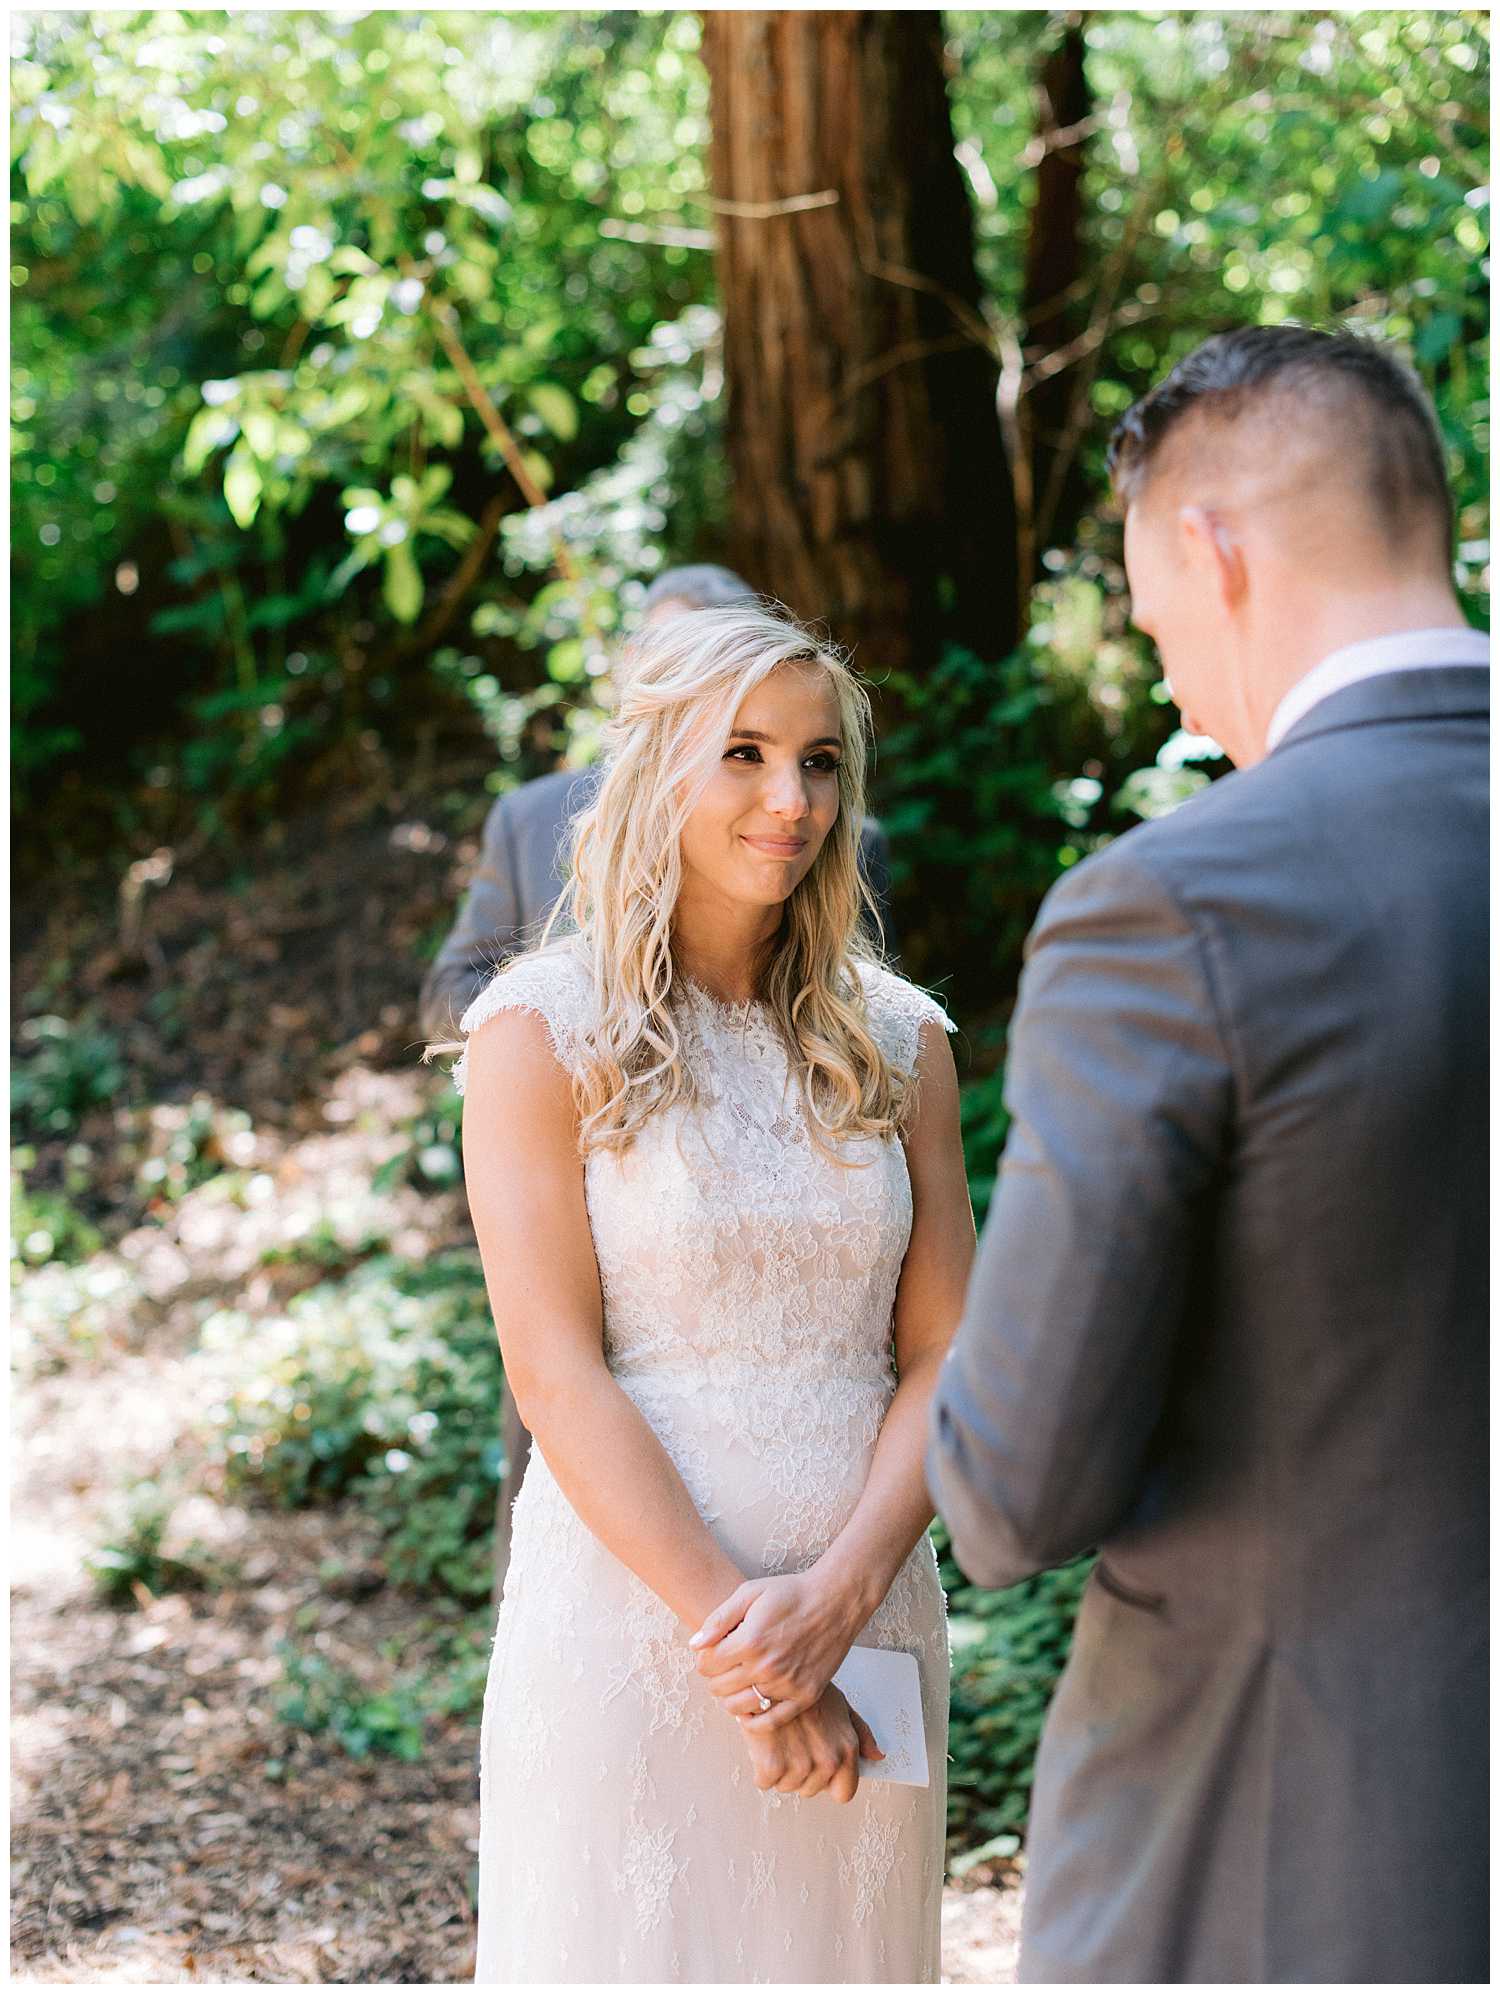 Kelsey listens to Mitchell's vows